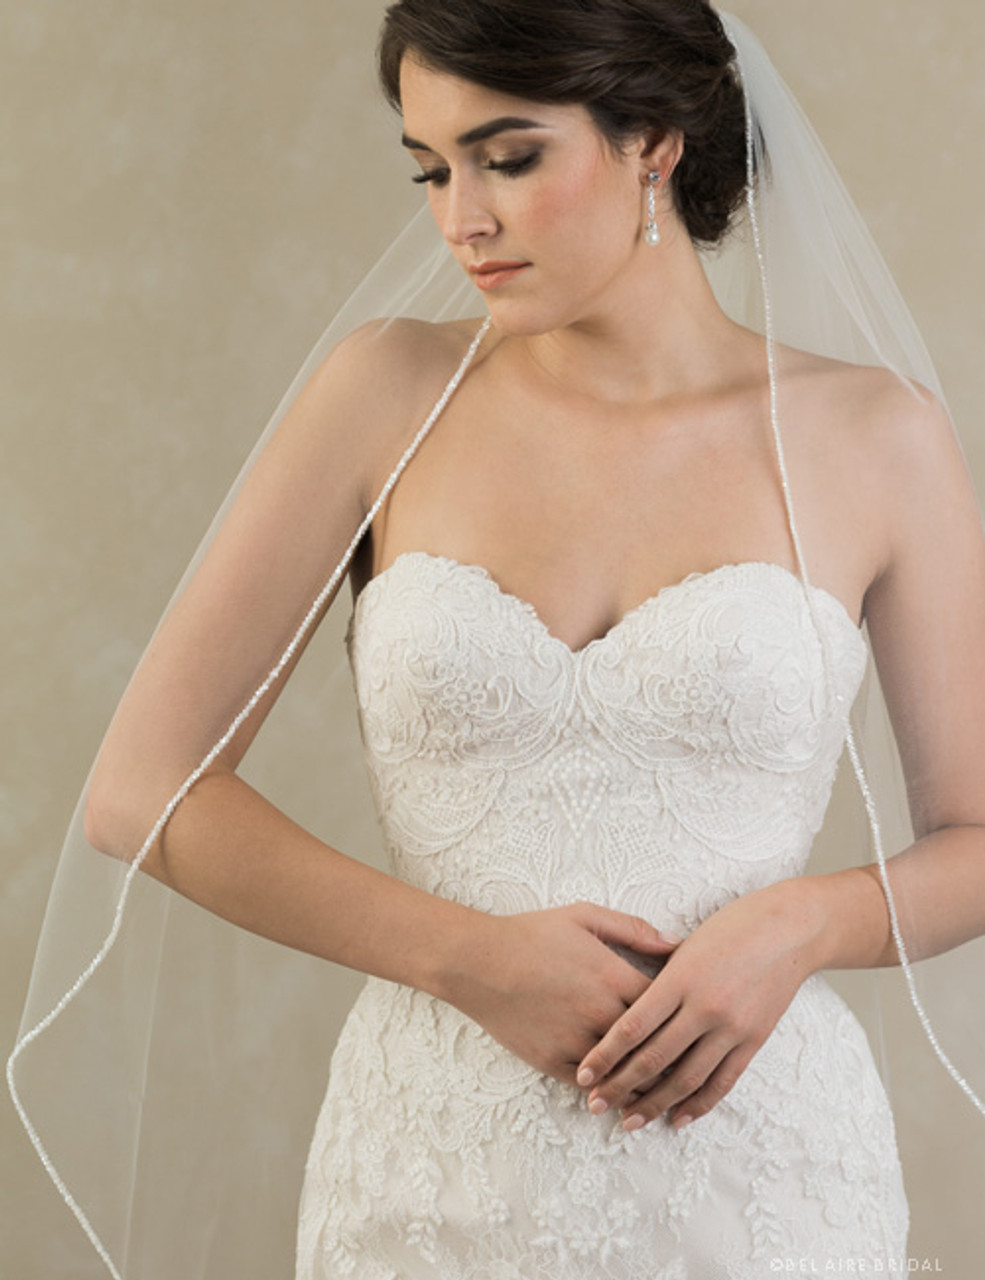 Bel Aire Bridal Veils V7383 -  1-tier fingertip veil with frosted bead edge